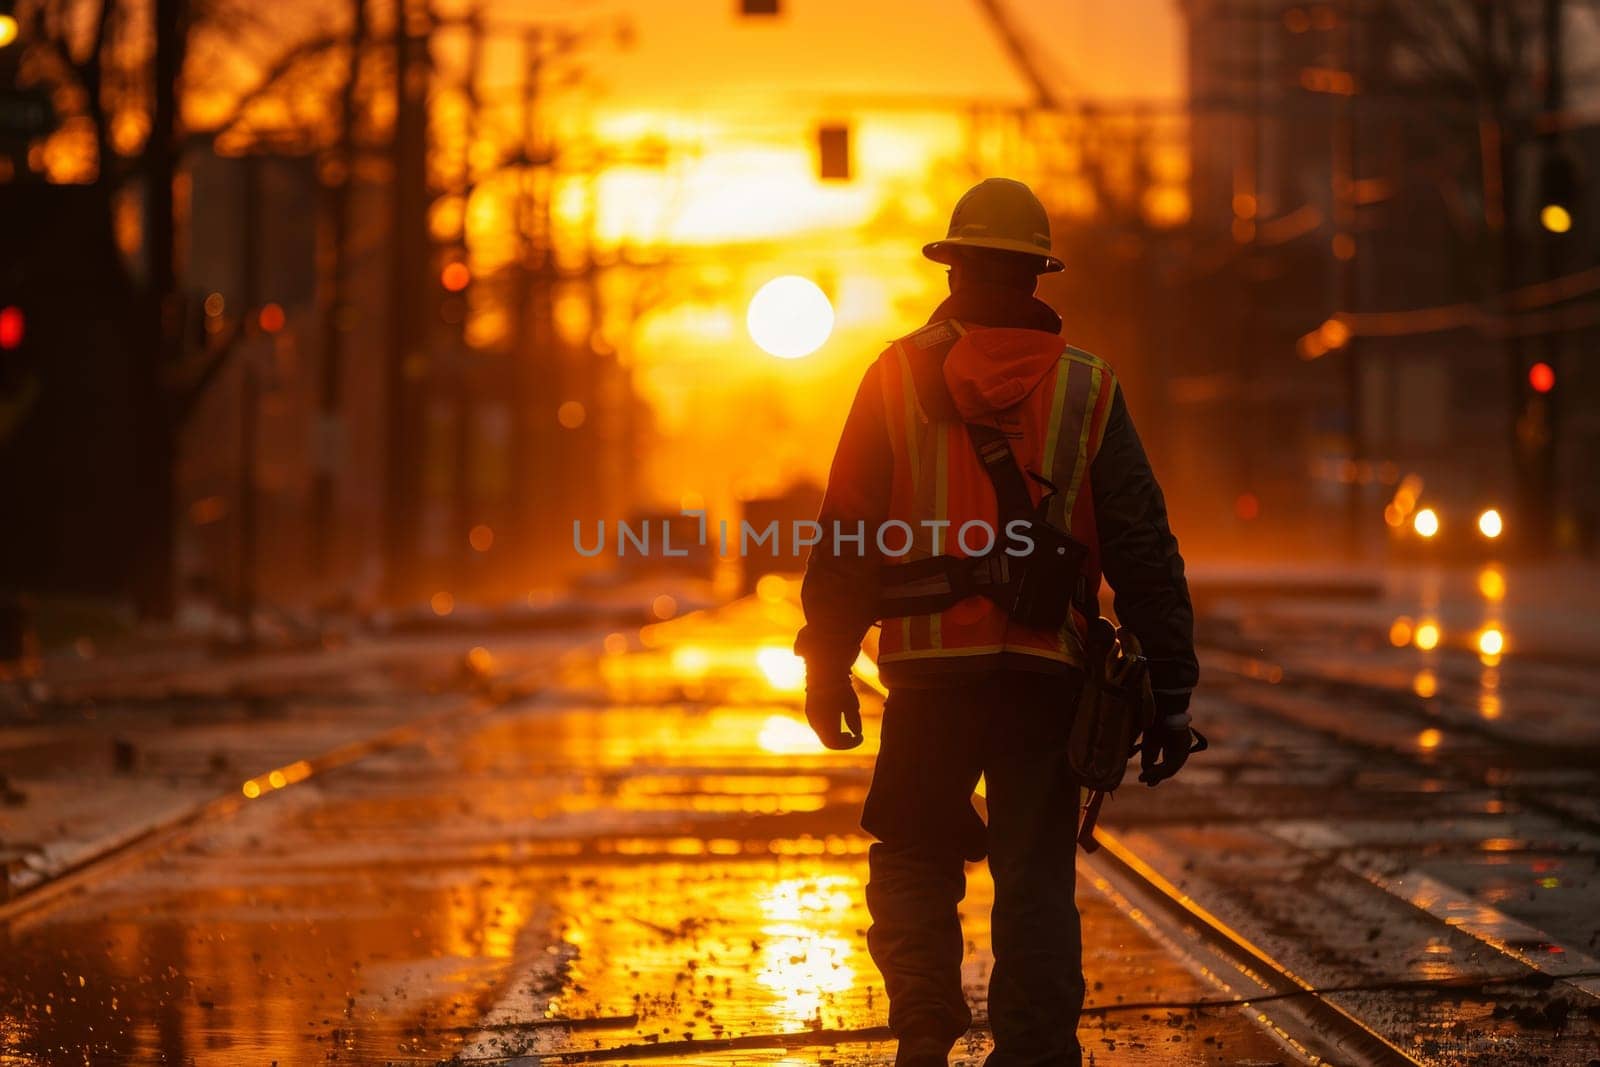 A man in a safety vest walks down a street at sunset by itchaznong